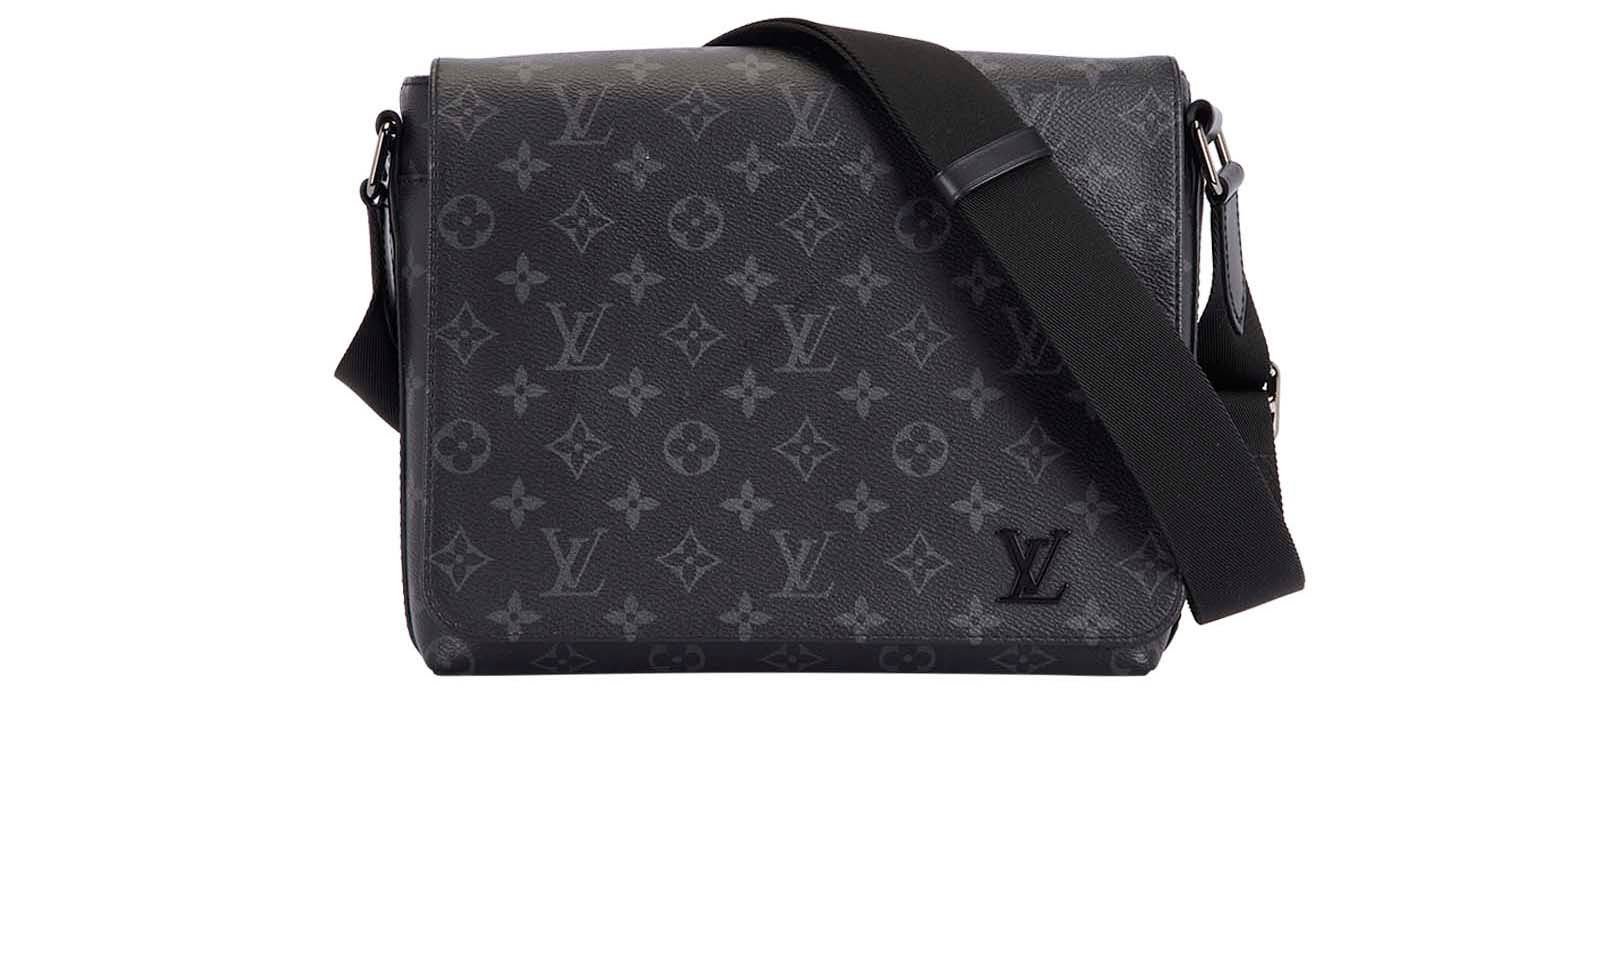 Louis Vuitton Carryall PM wristlet pouch only